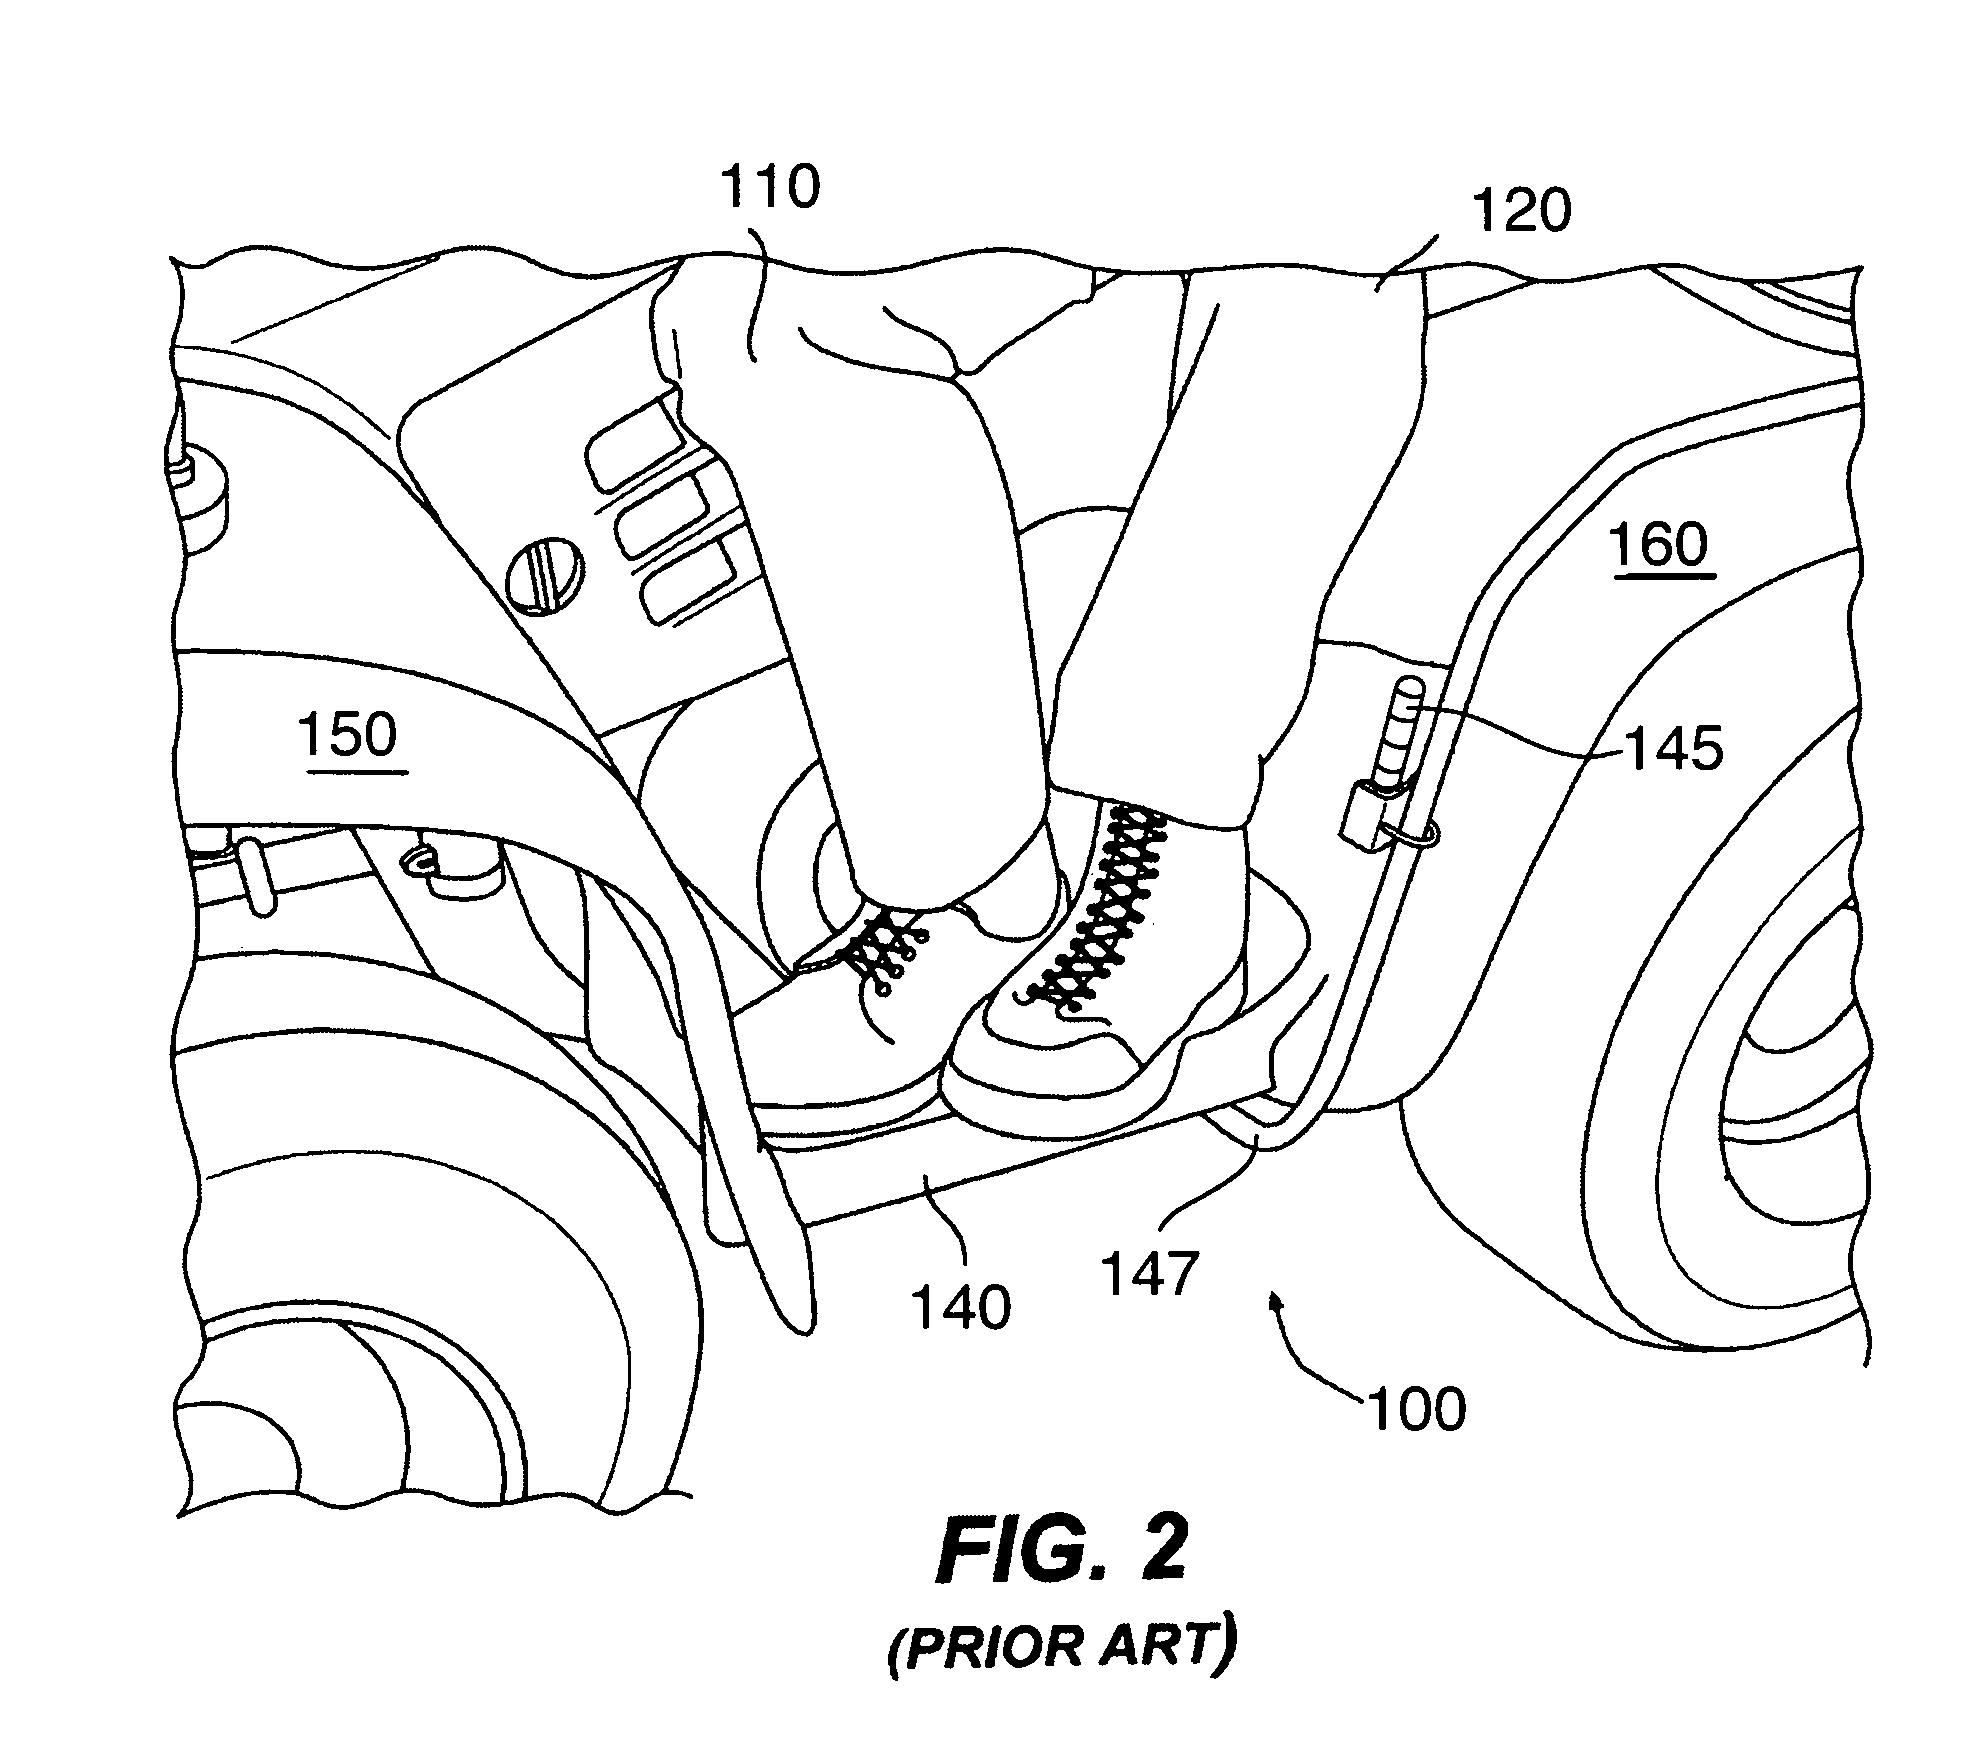 Flip-down footrests for an all-terrain vehicle